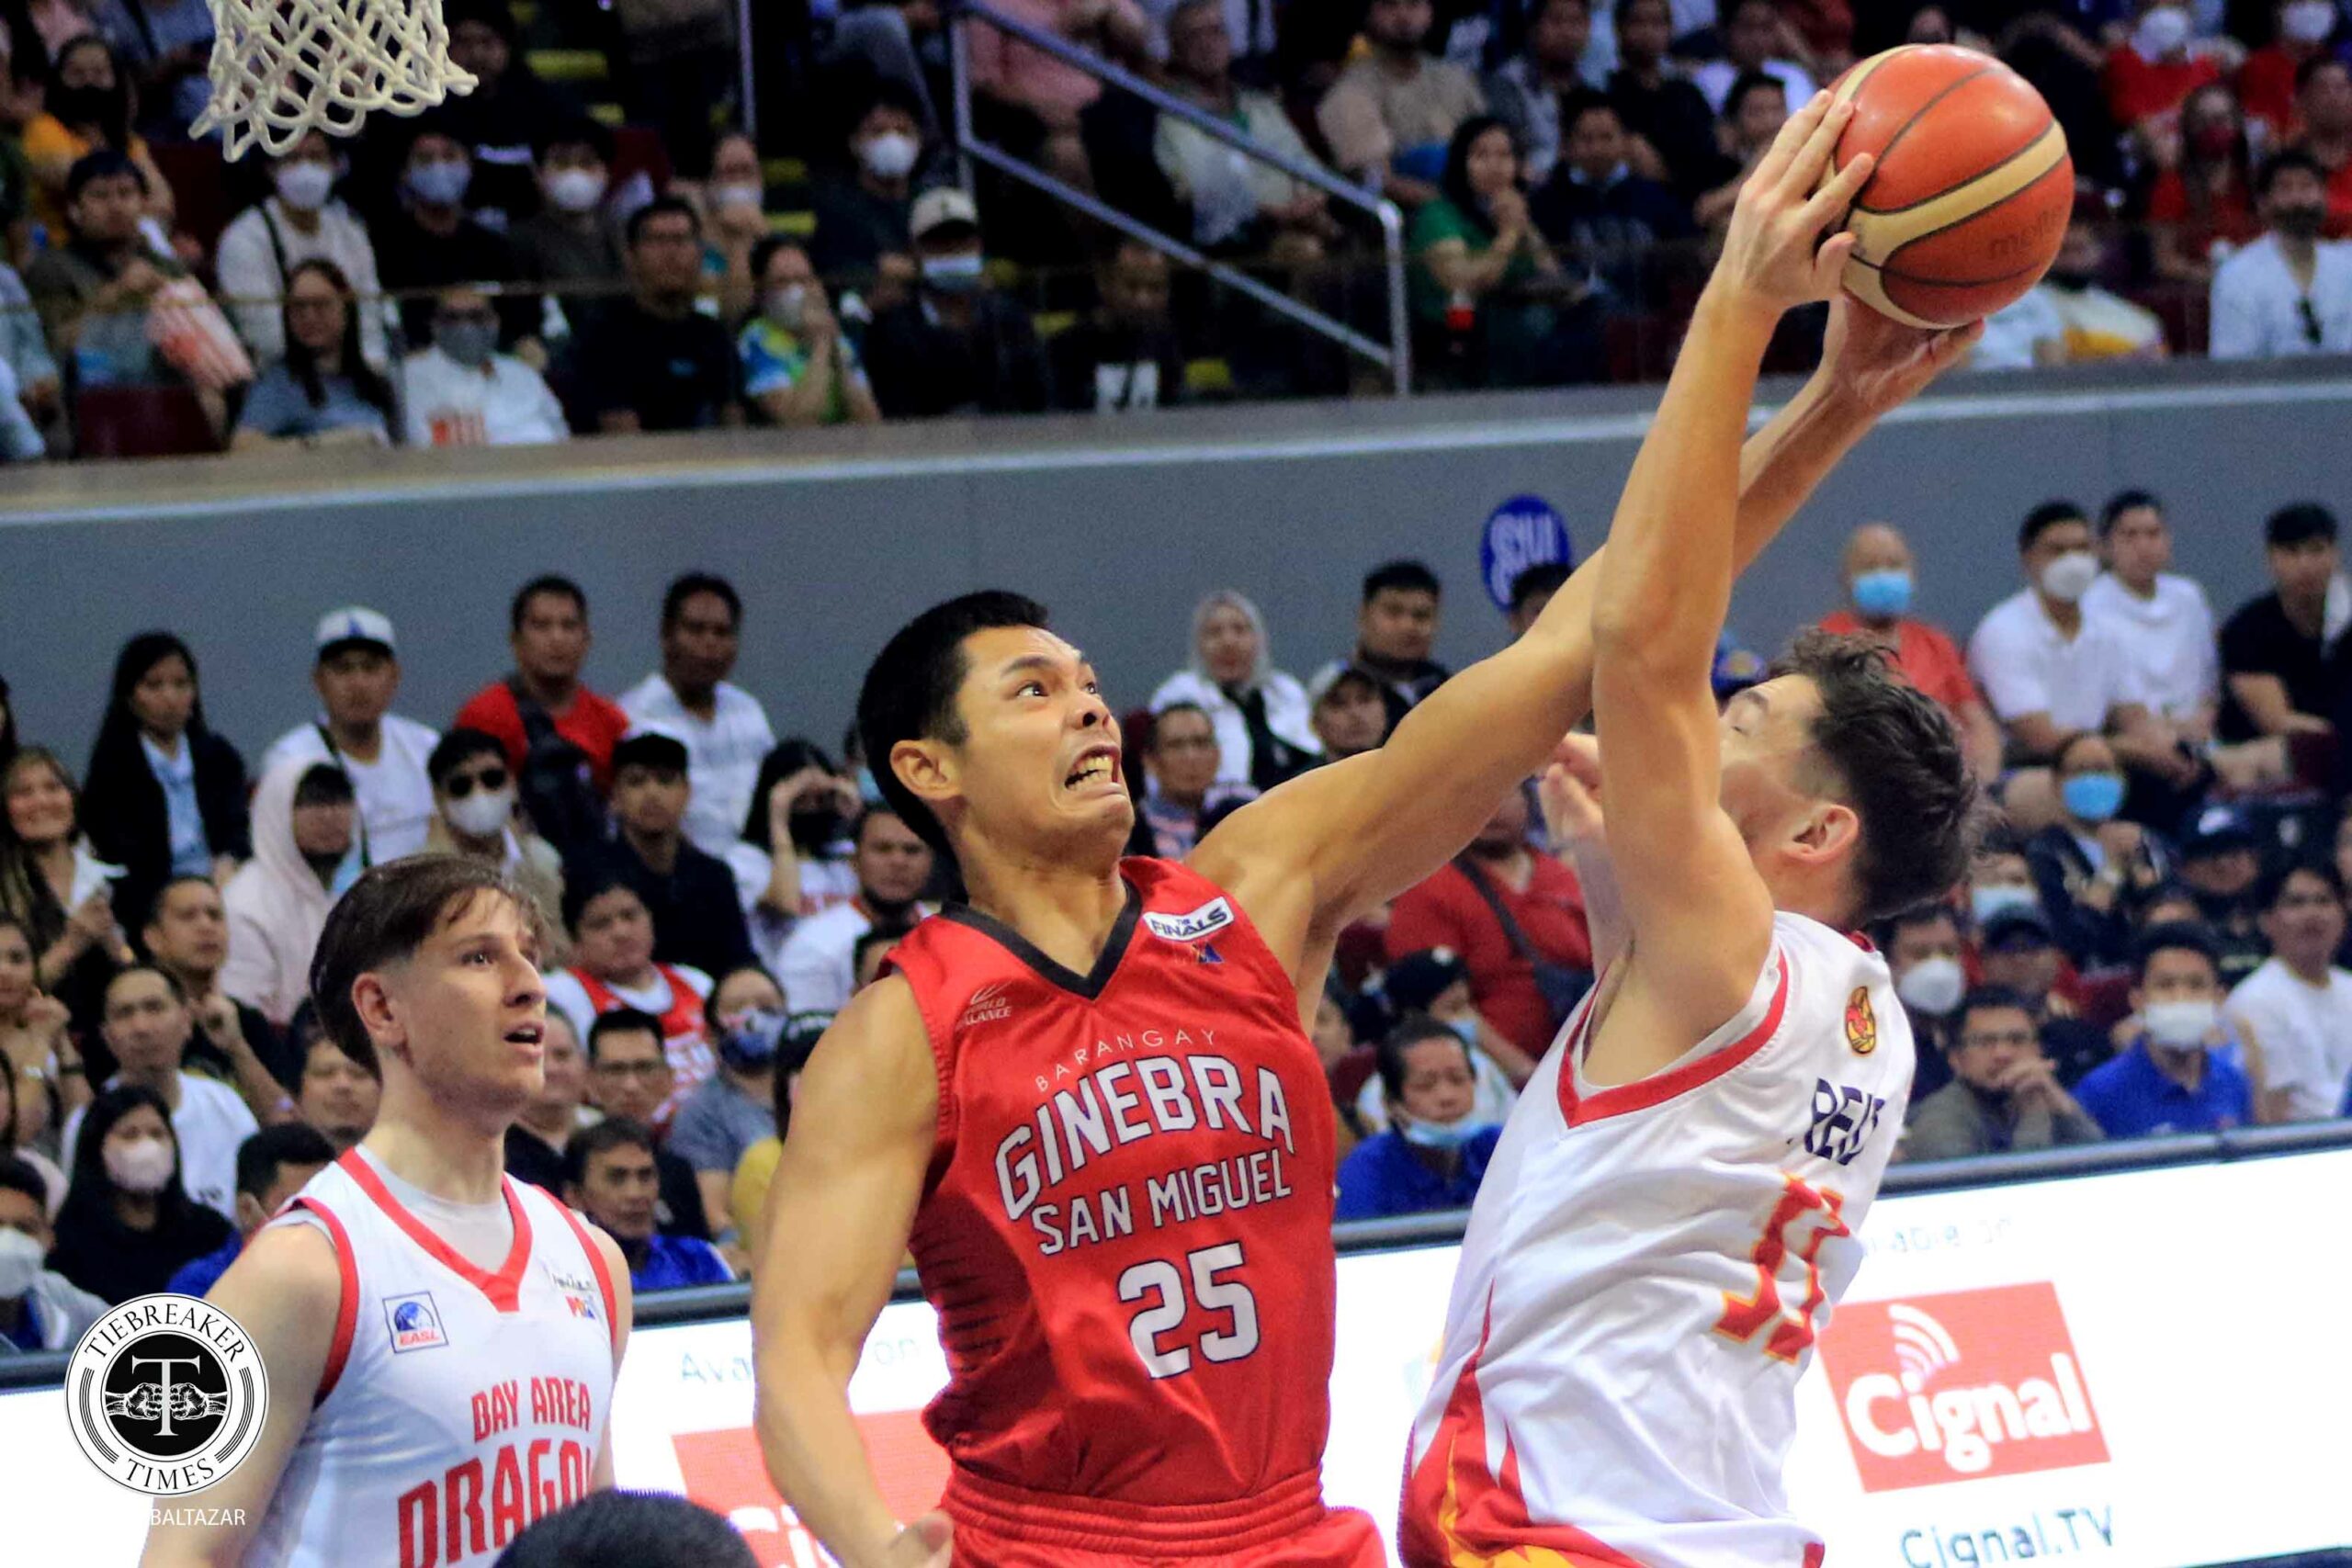 2022-PBA-Commissioners-Cup-Finals-Game-5-Ginebra-vs-Bay-Area-Japeth-Aguilar-scaled Cone, Ginebra cross fingers as Tenorio suffers groin injury Basketball News PBA  - philippine sports news